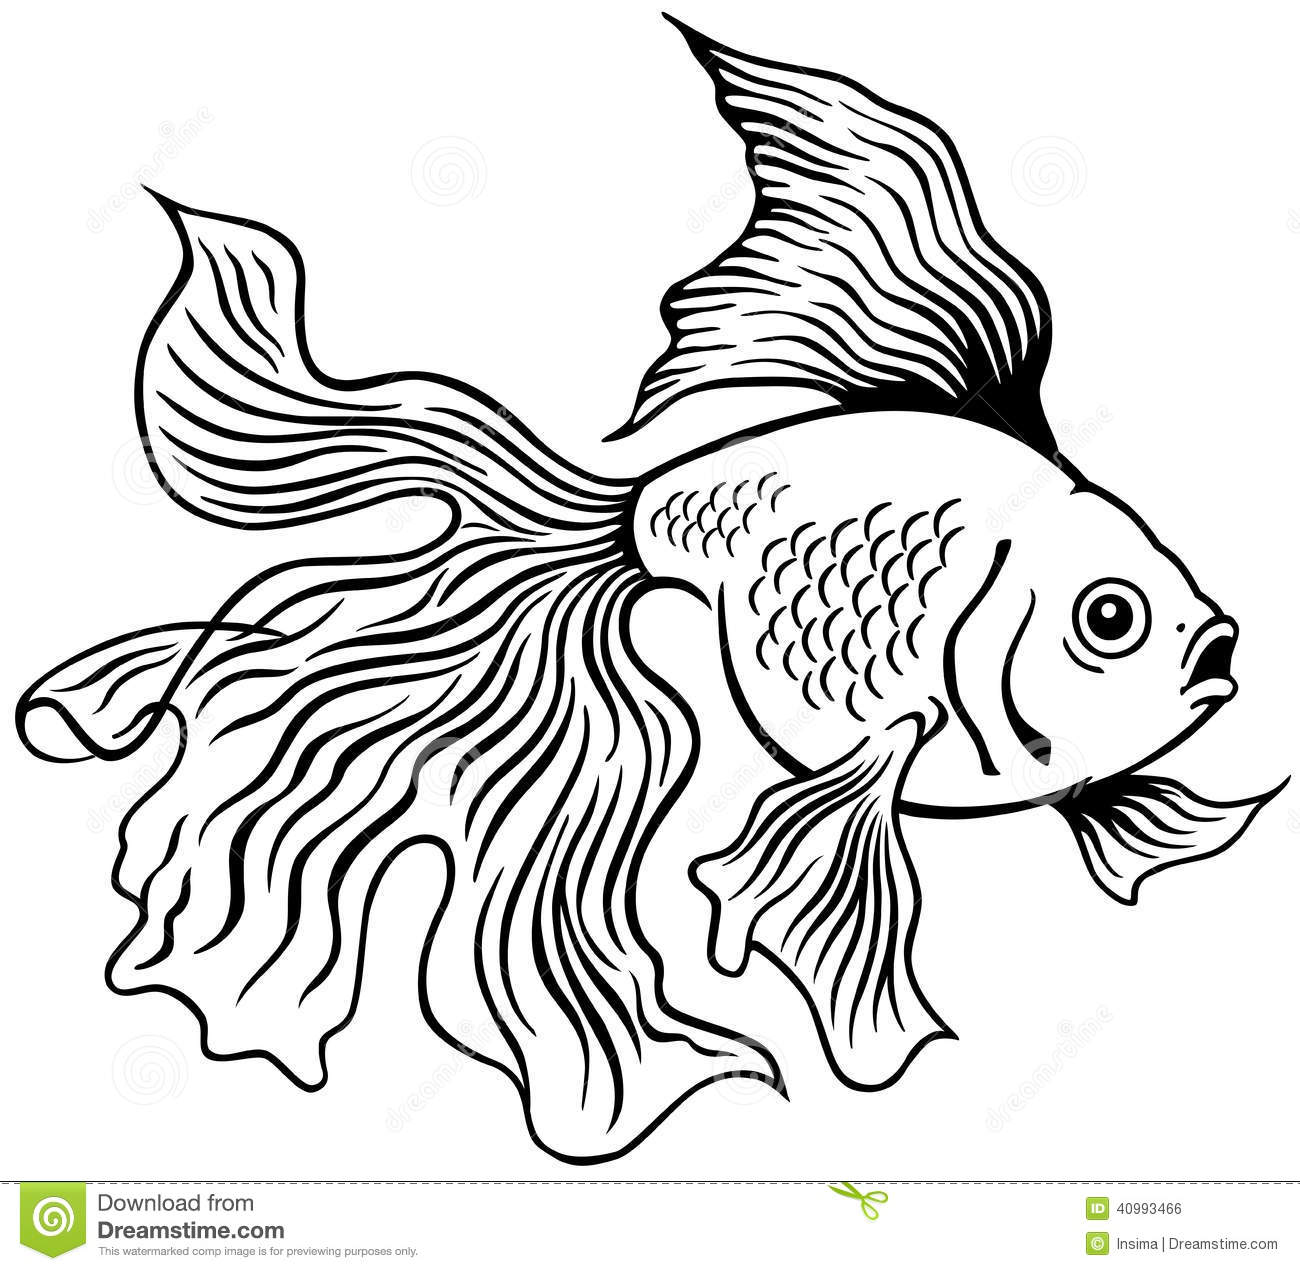 Goldfish Or Golden Fish Black And White Side View Outline Image 